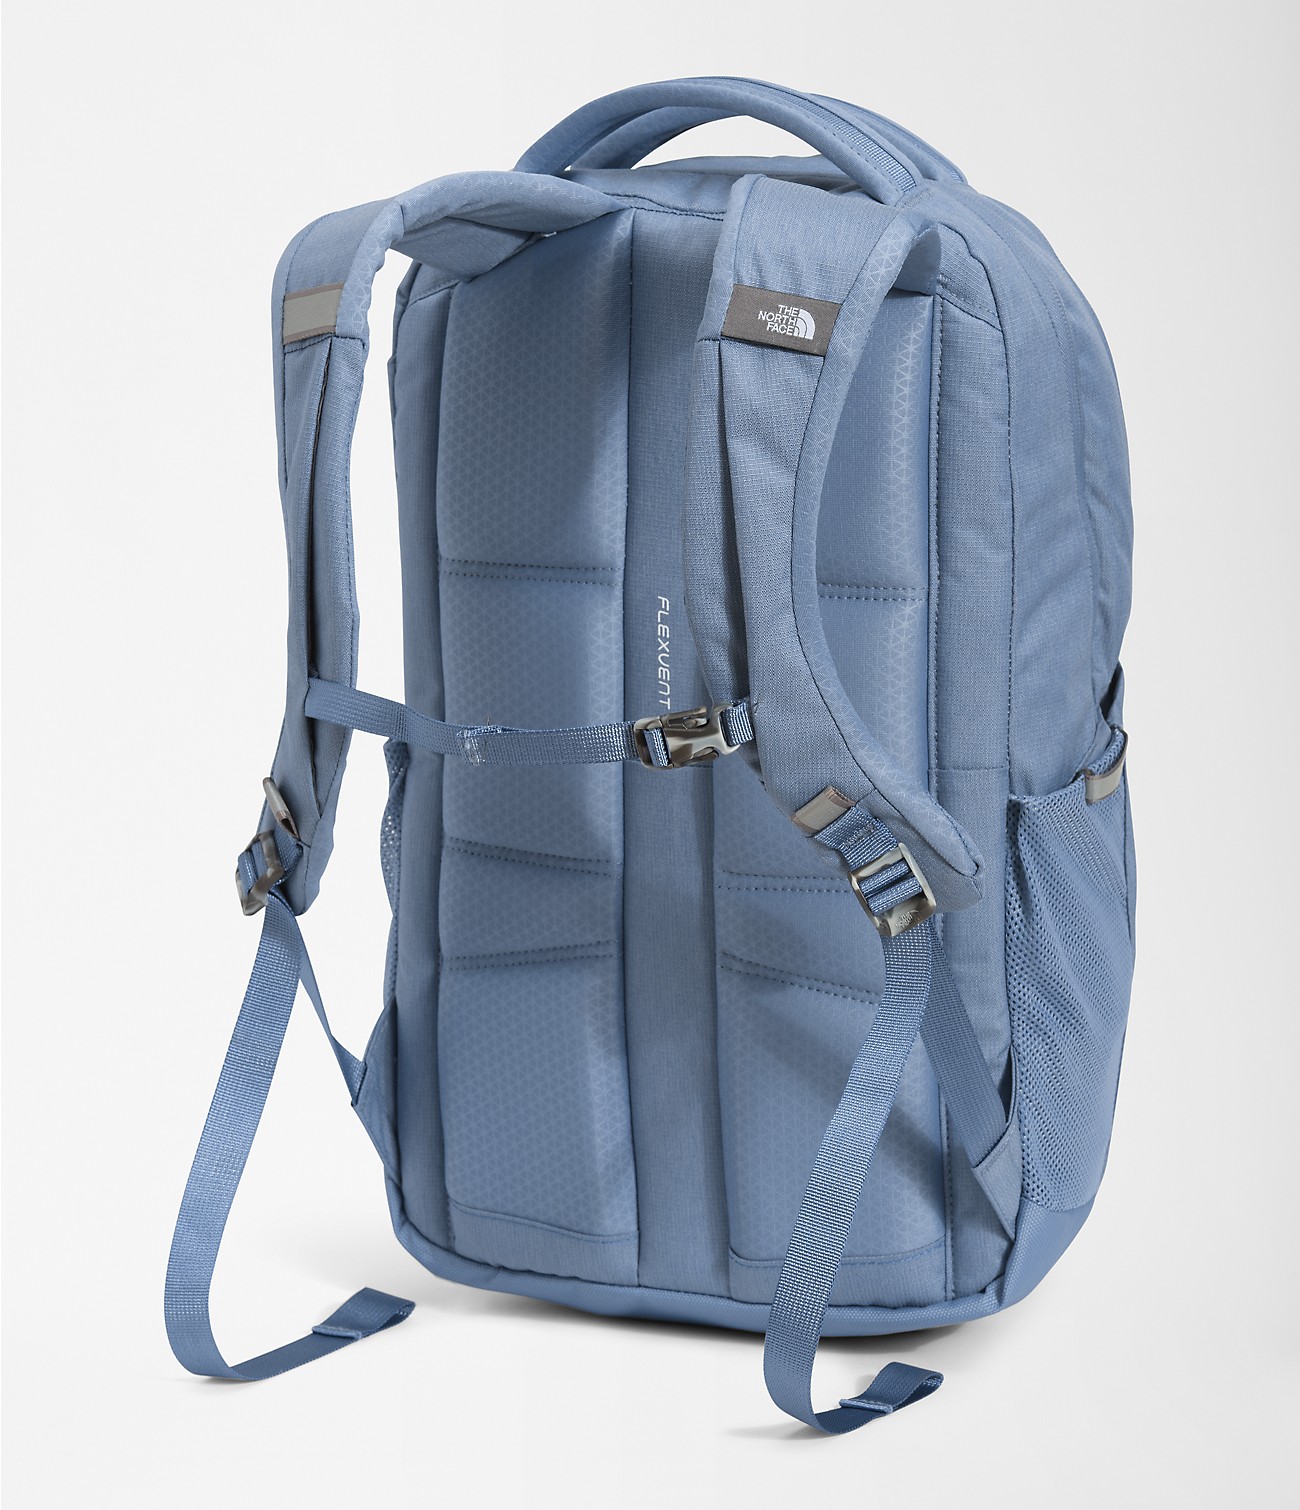 Women’s Vault Backpack | The North Face